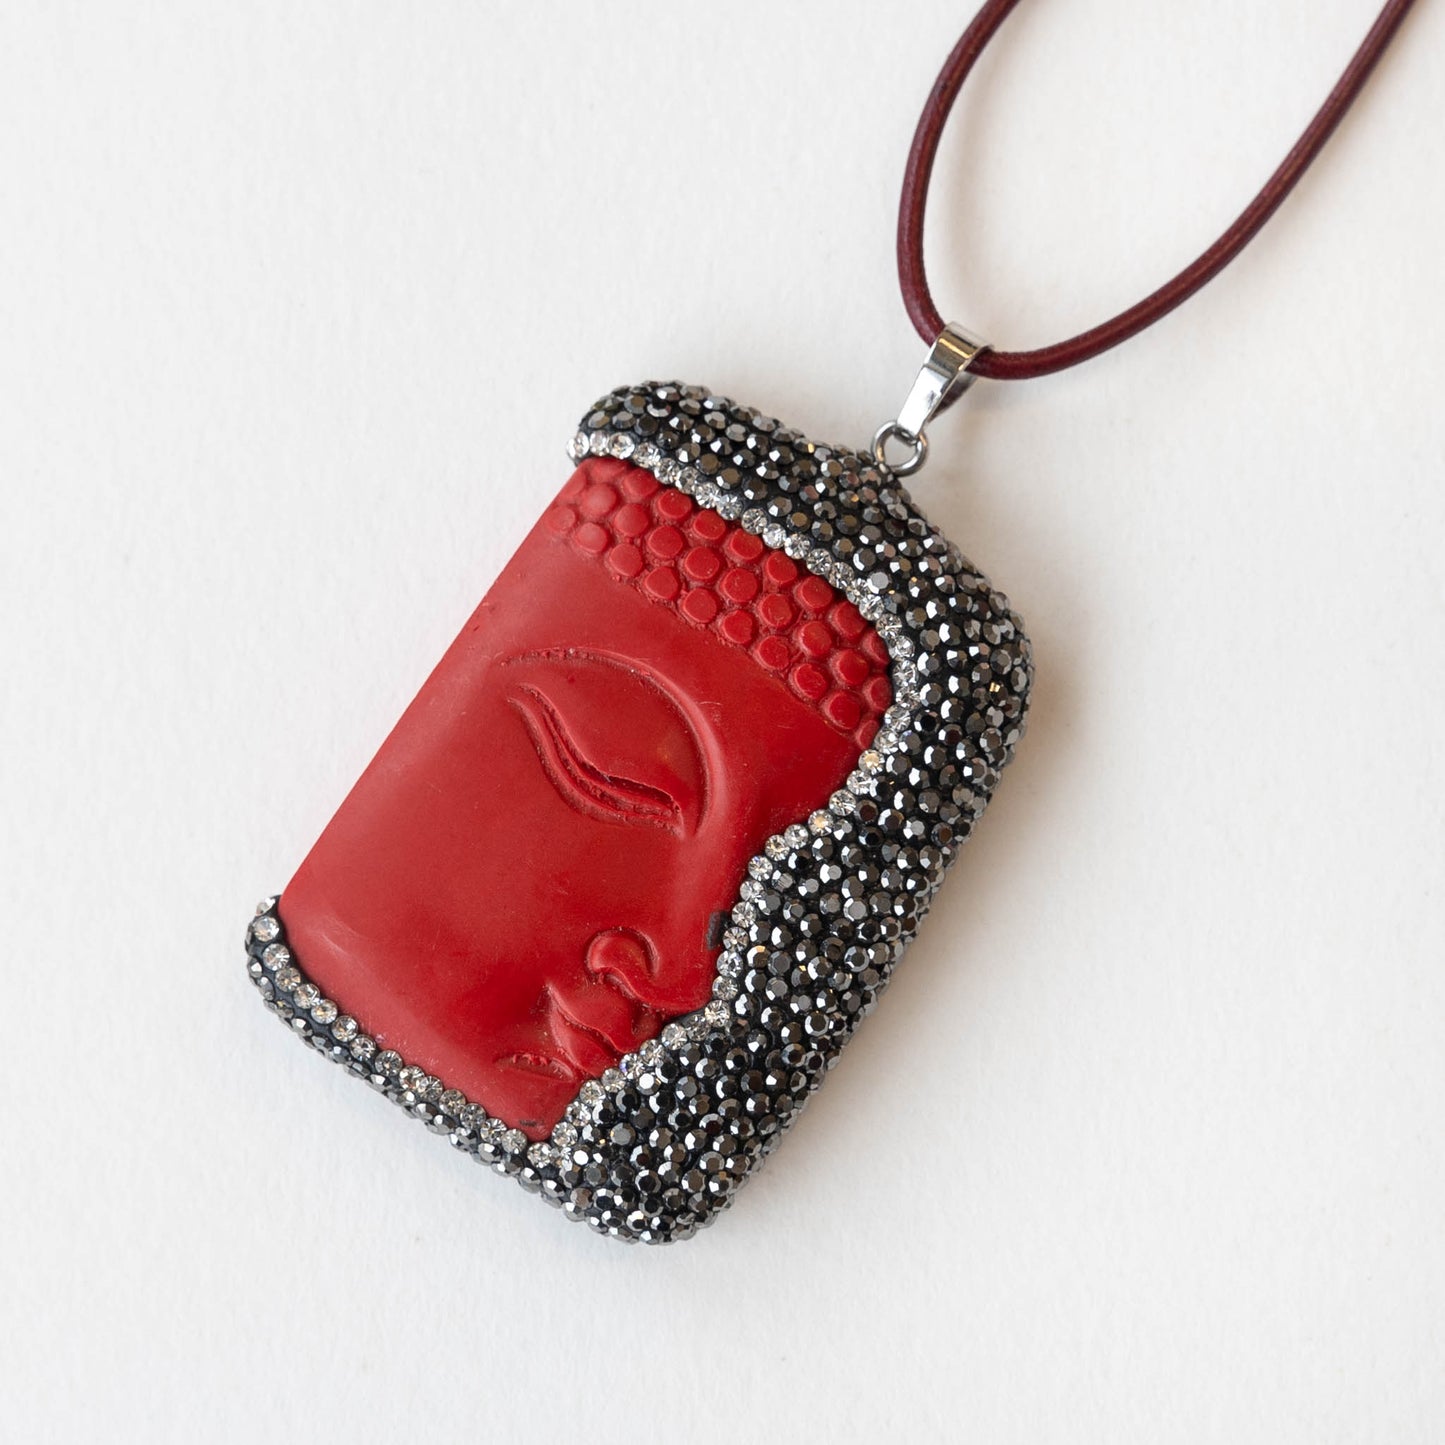 Blingy Peaceful Glass Buddha Pendant Bead - Red with Marcasite - 1 Pendant